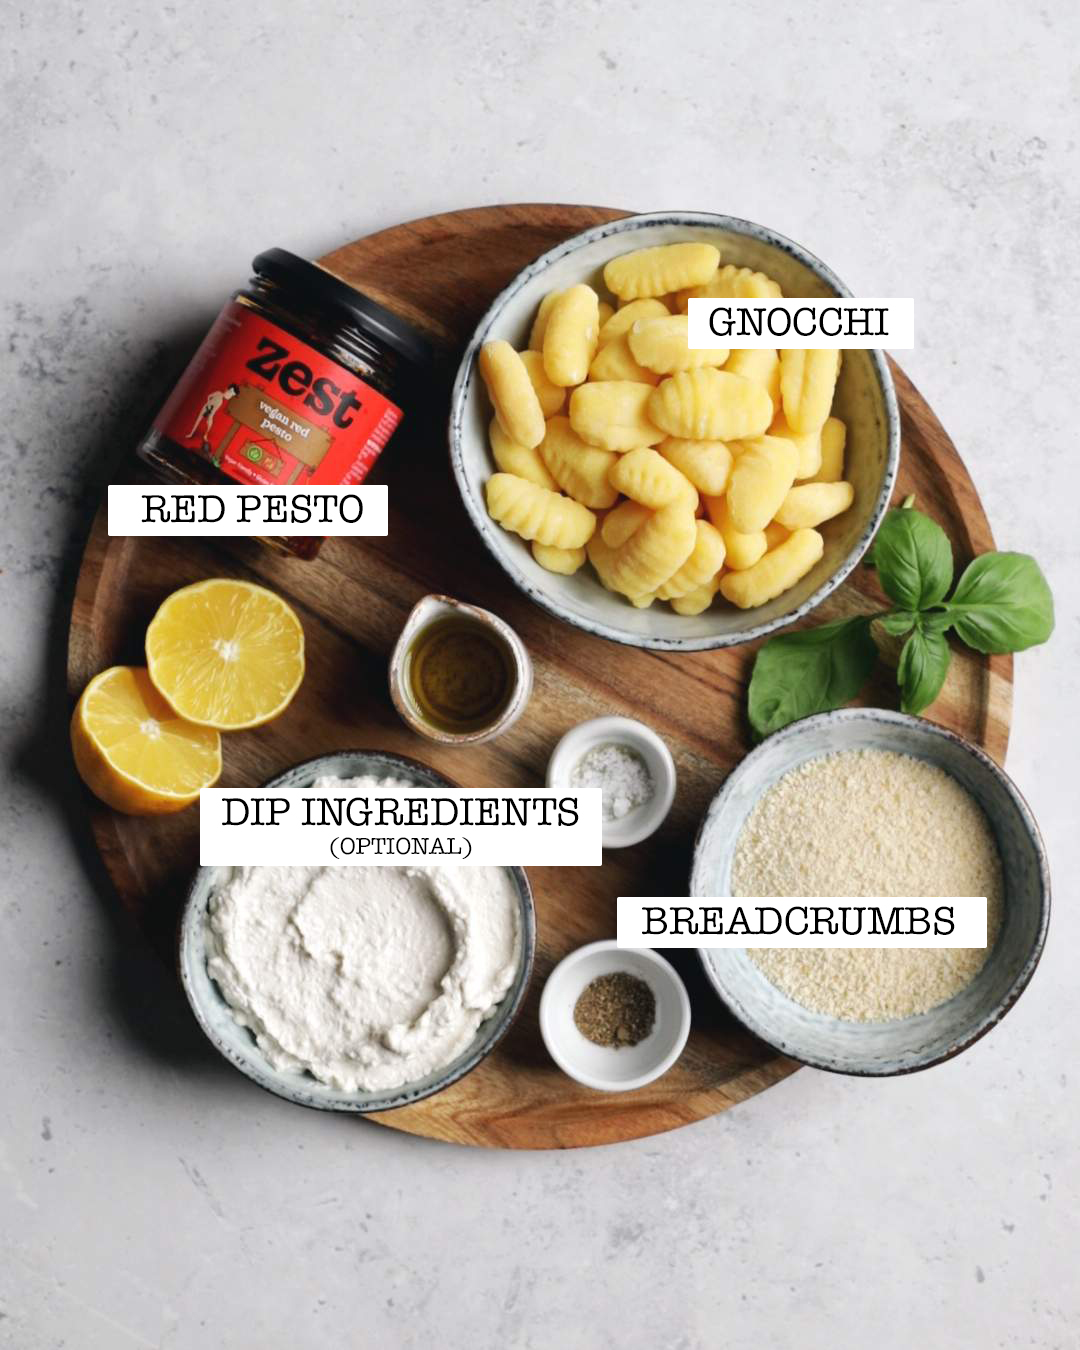 Ingredients for air fryer gnocchi on a tray.